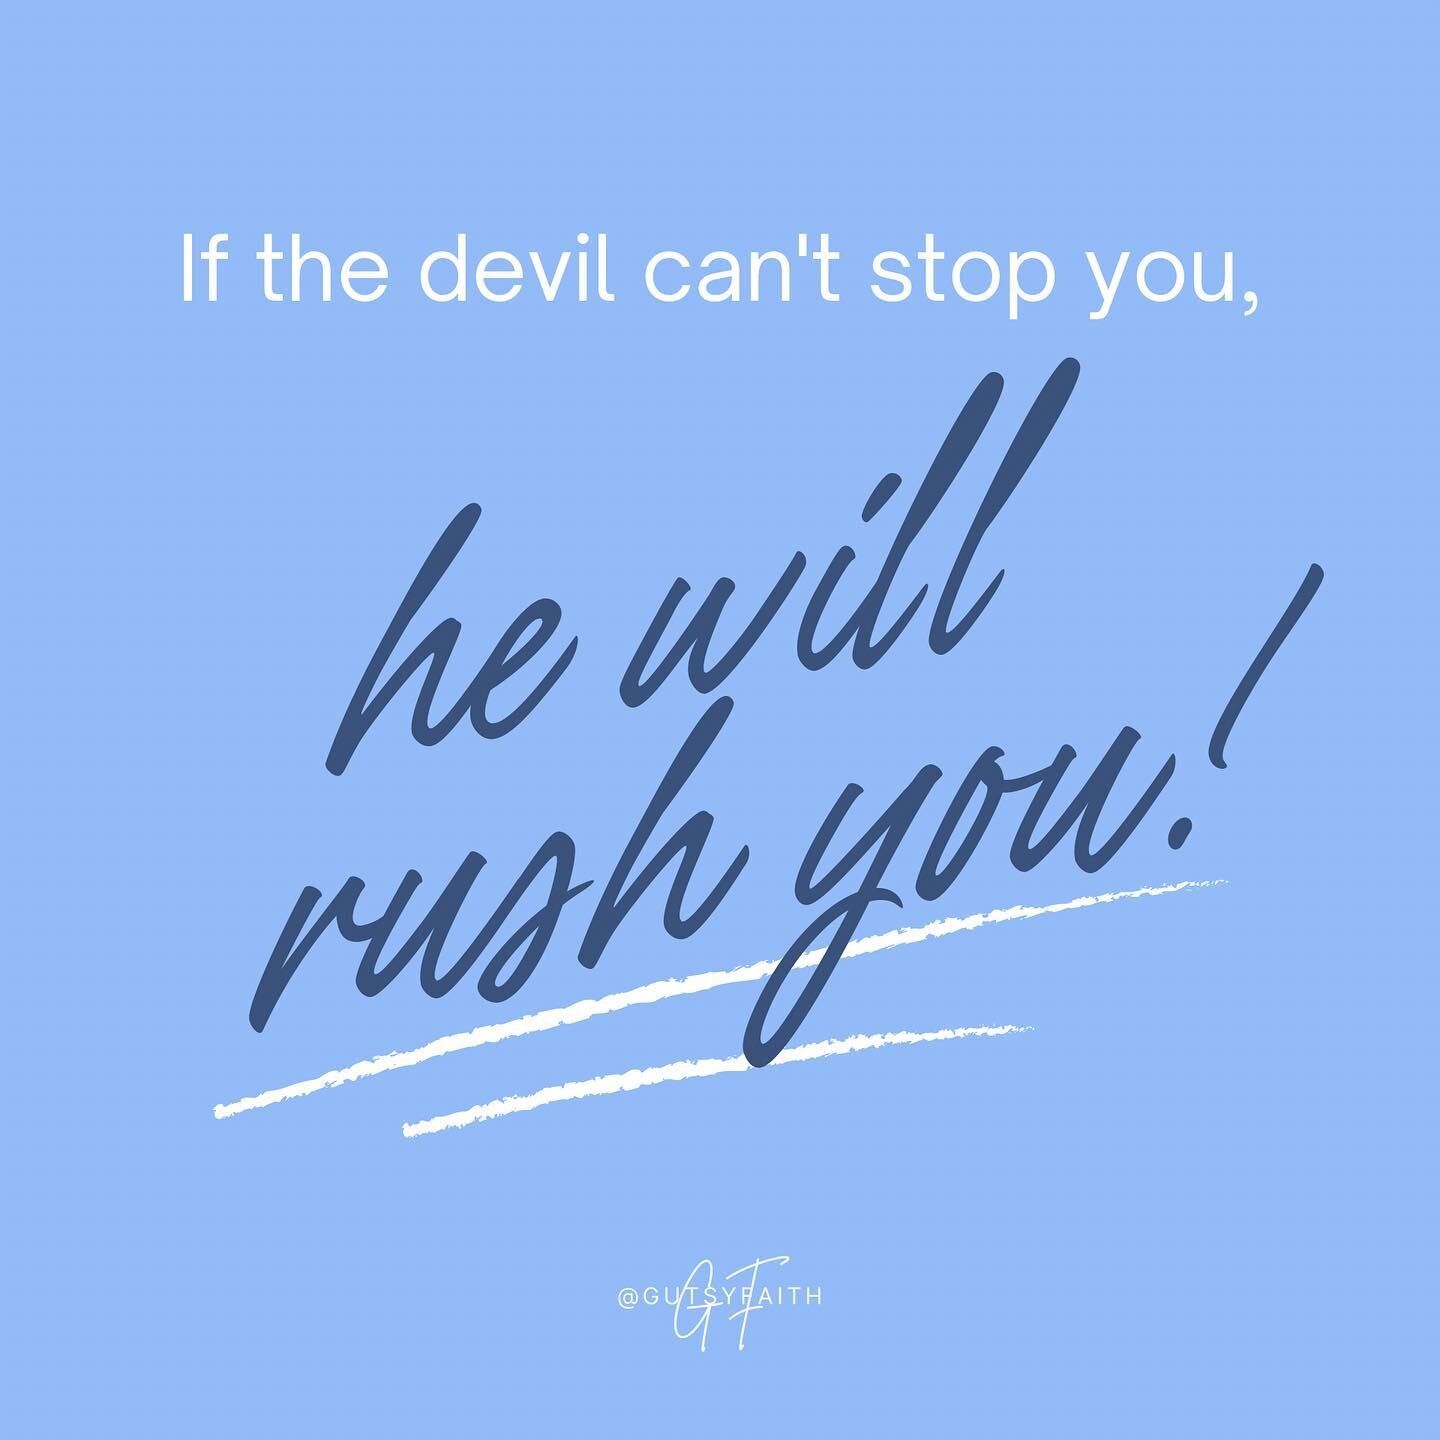 Jesus was never in a hurry, so why are you?

Don&rsquo;t let the devil deceive you anymore with this old trick! ❌

God&rsquo;s timing is perfect, we can trust in Him to get the job done.😊🙏🏼✨

#ChristianLiving  #SlowDown #NotInAHurry #God&rsquo;sTi